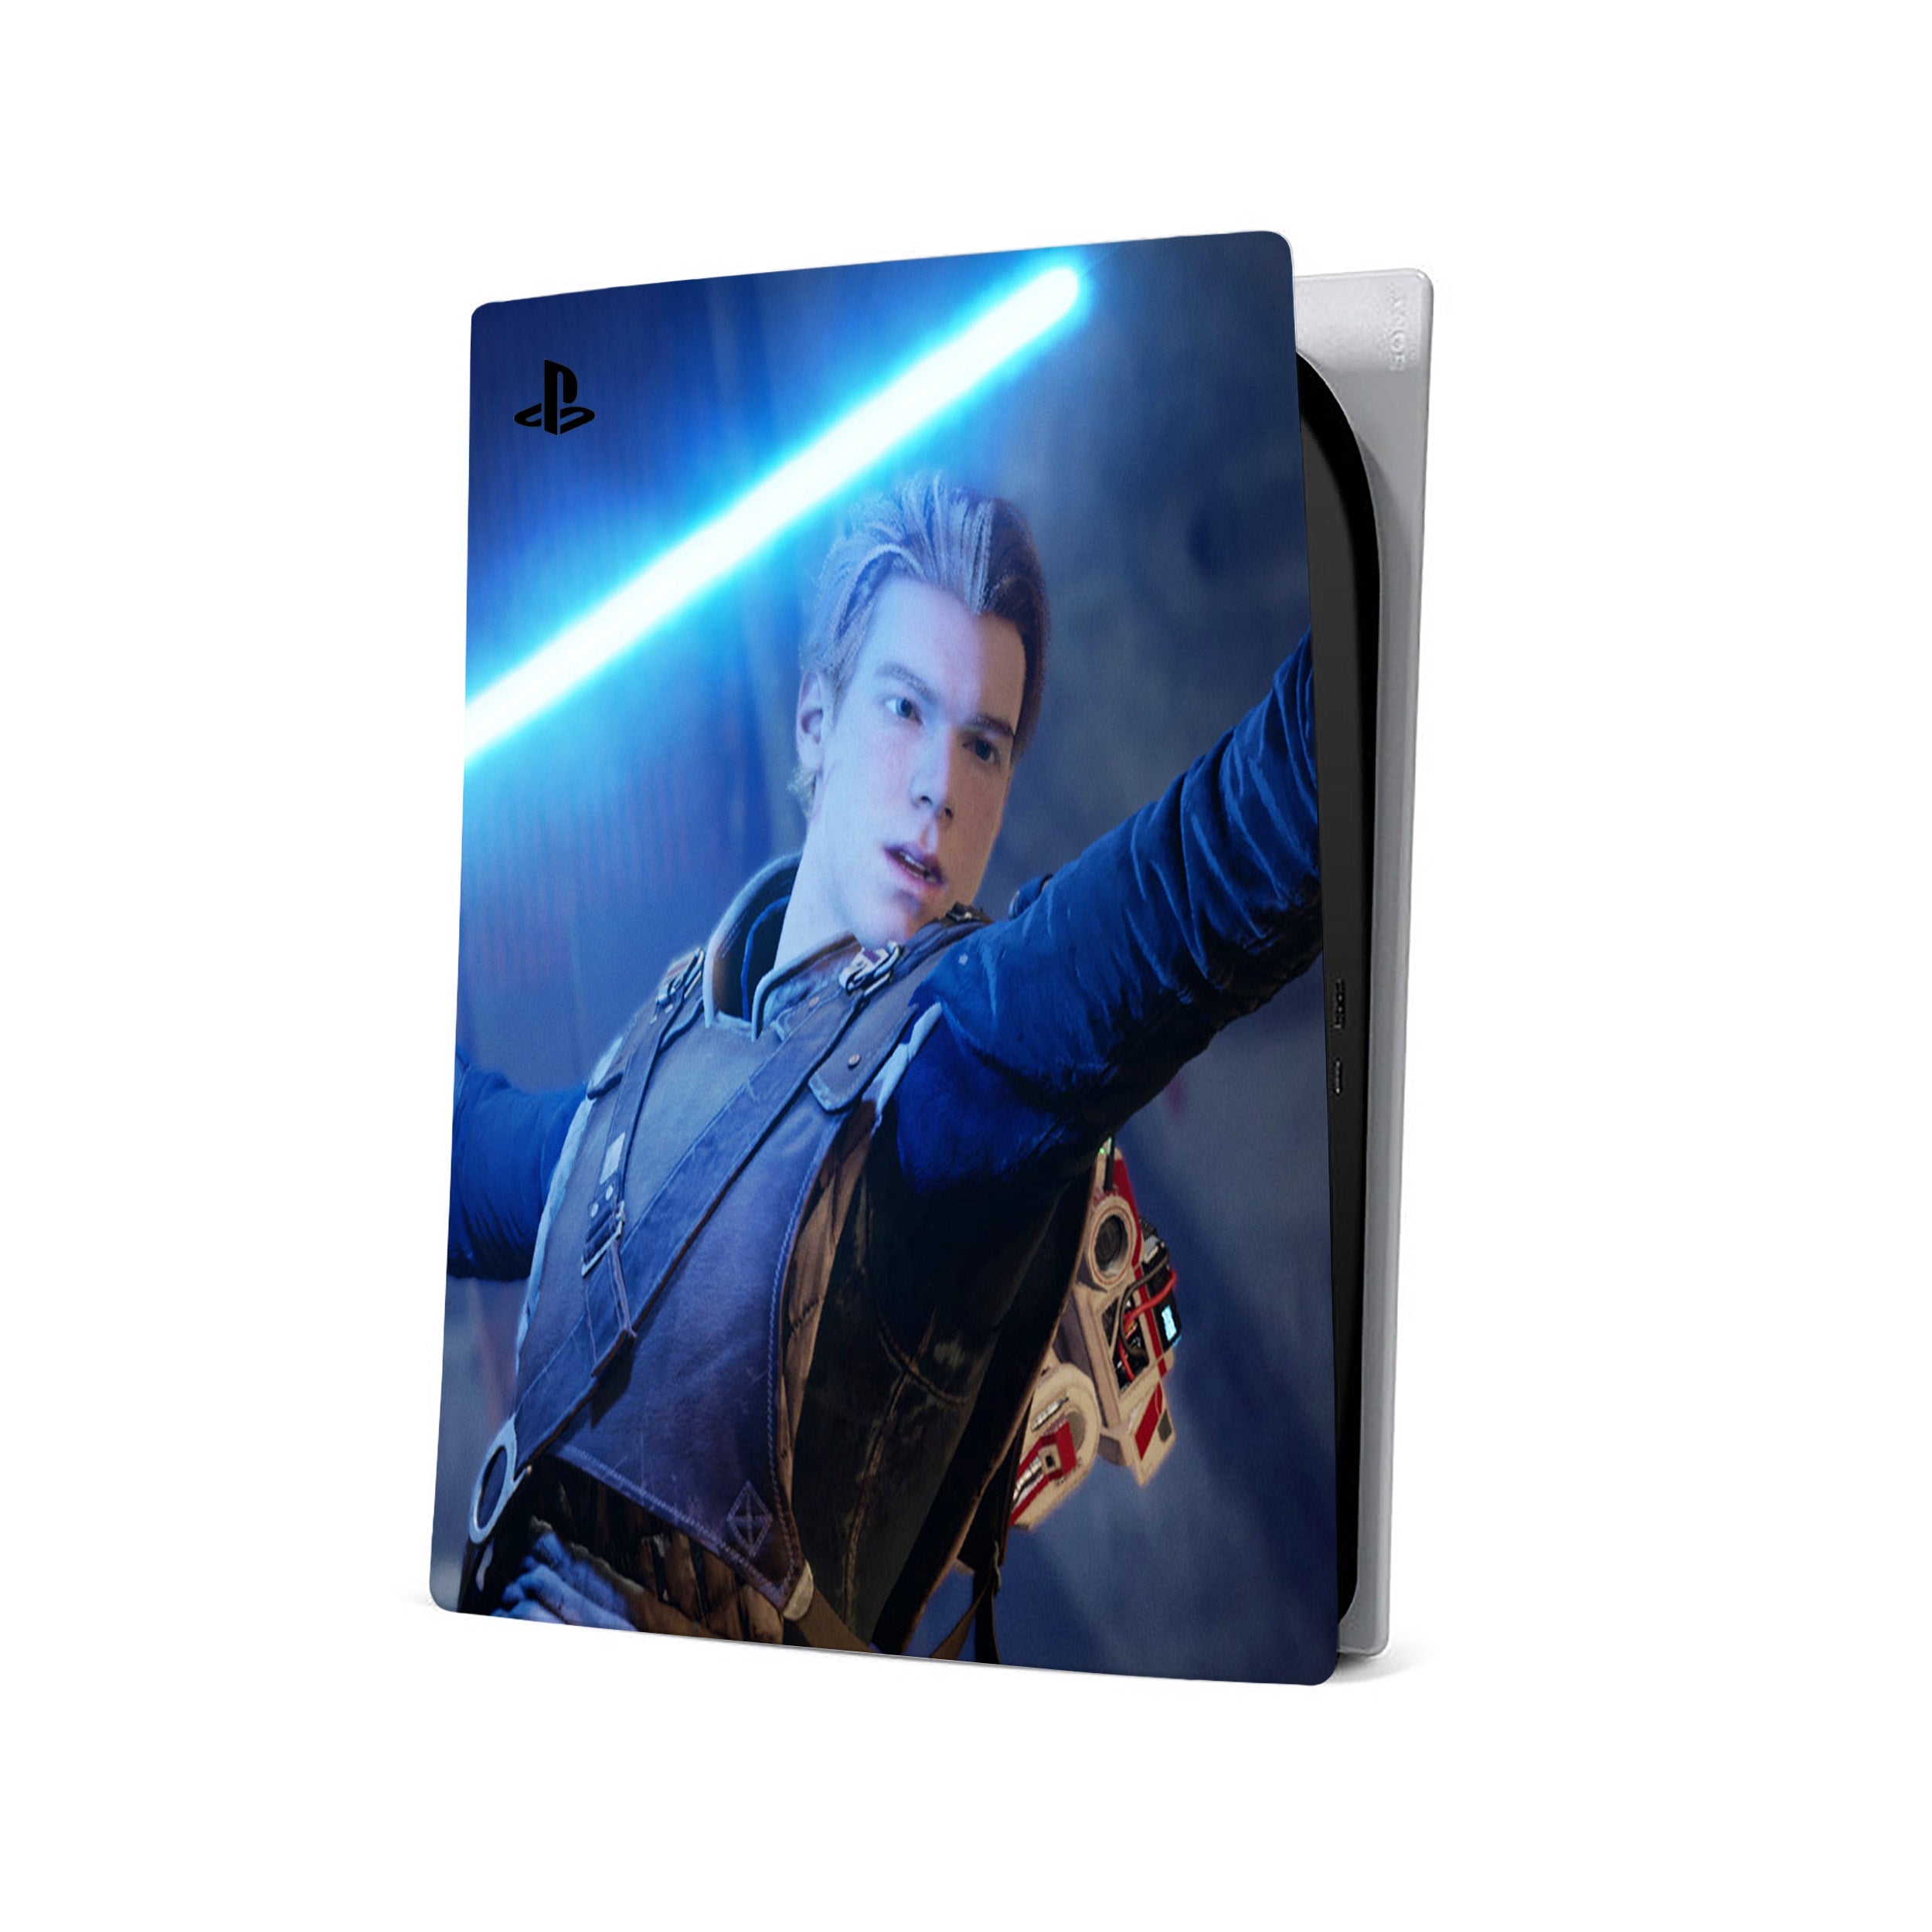 A video game skin featuring a Star Wars Jedi Fallen Order design for the PS5.